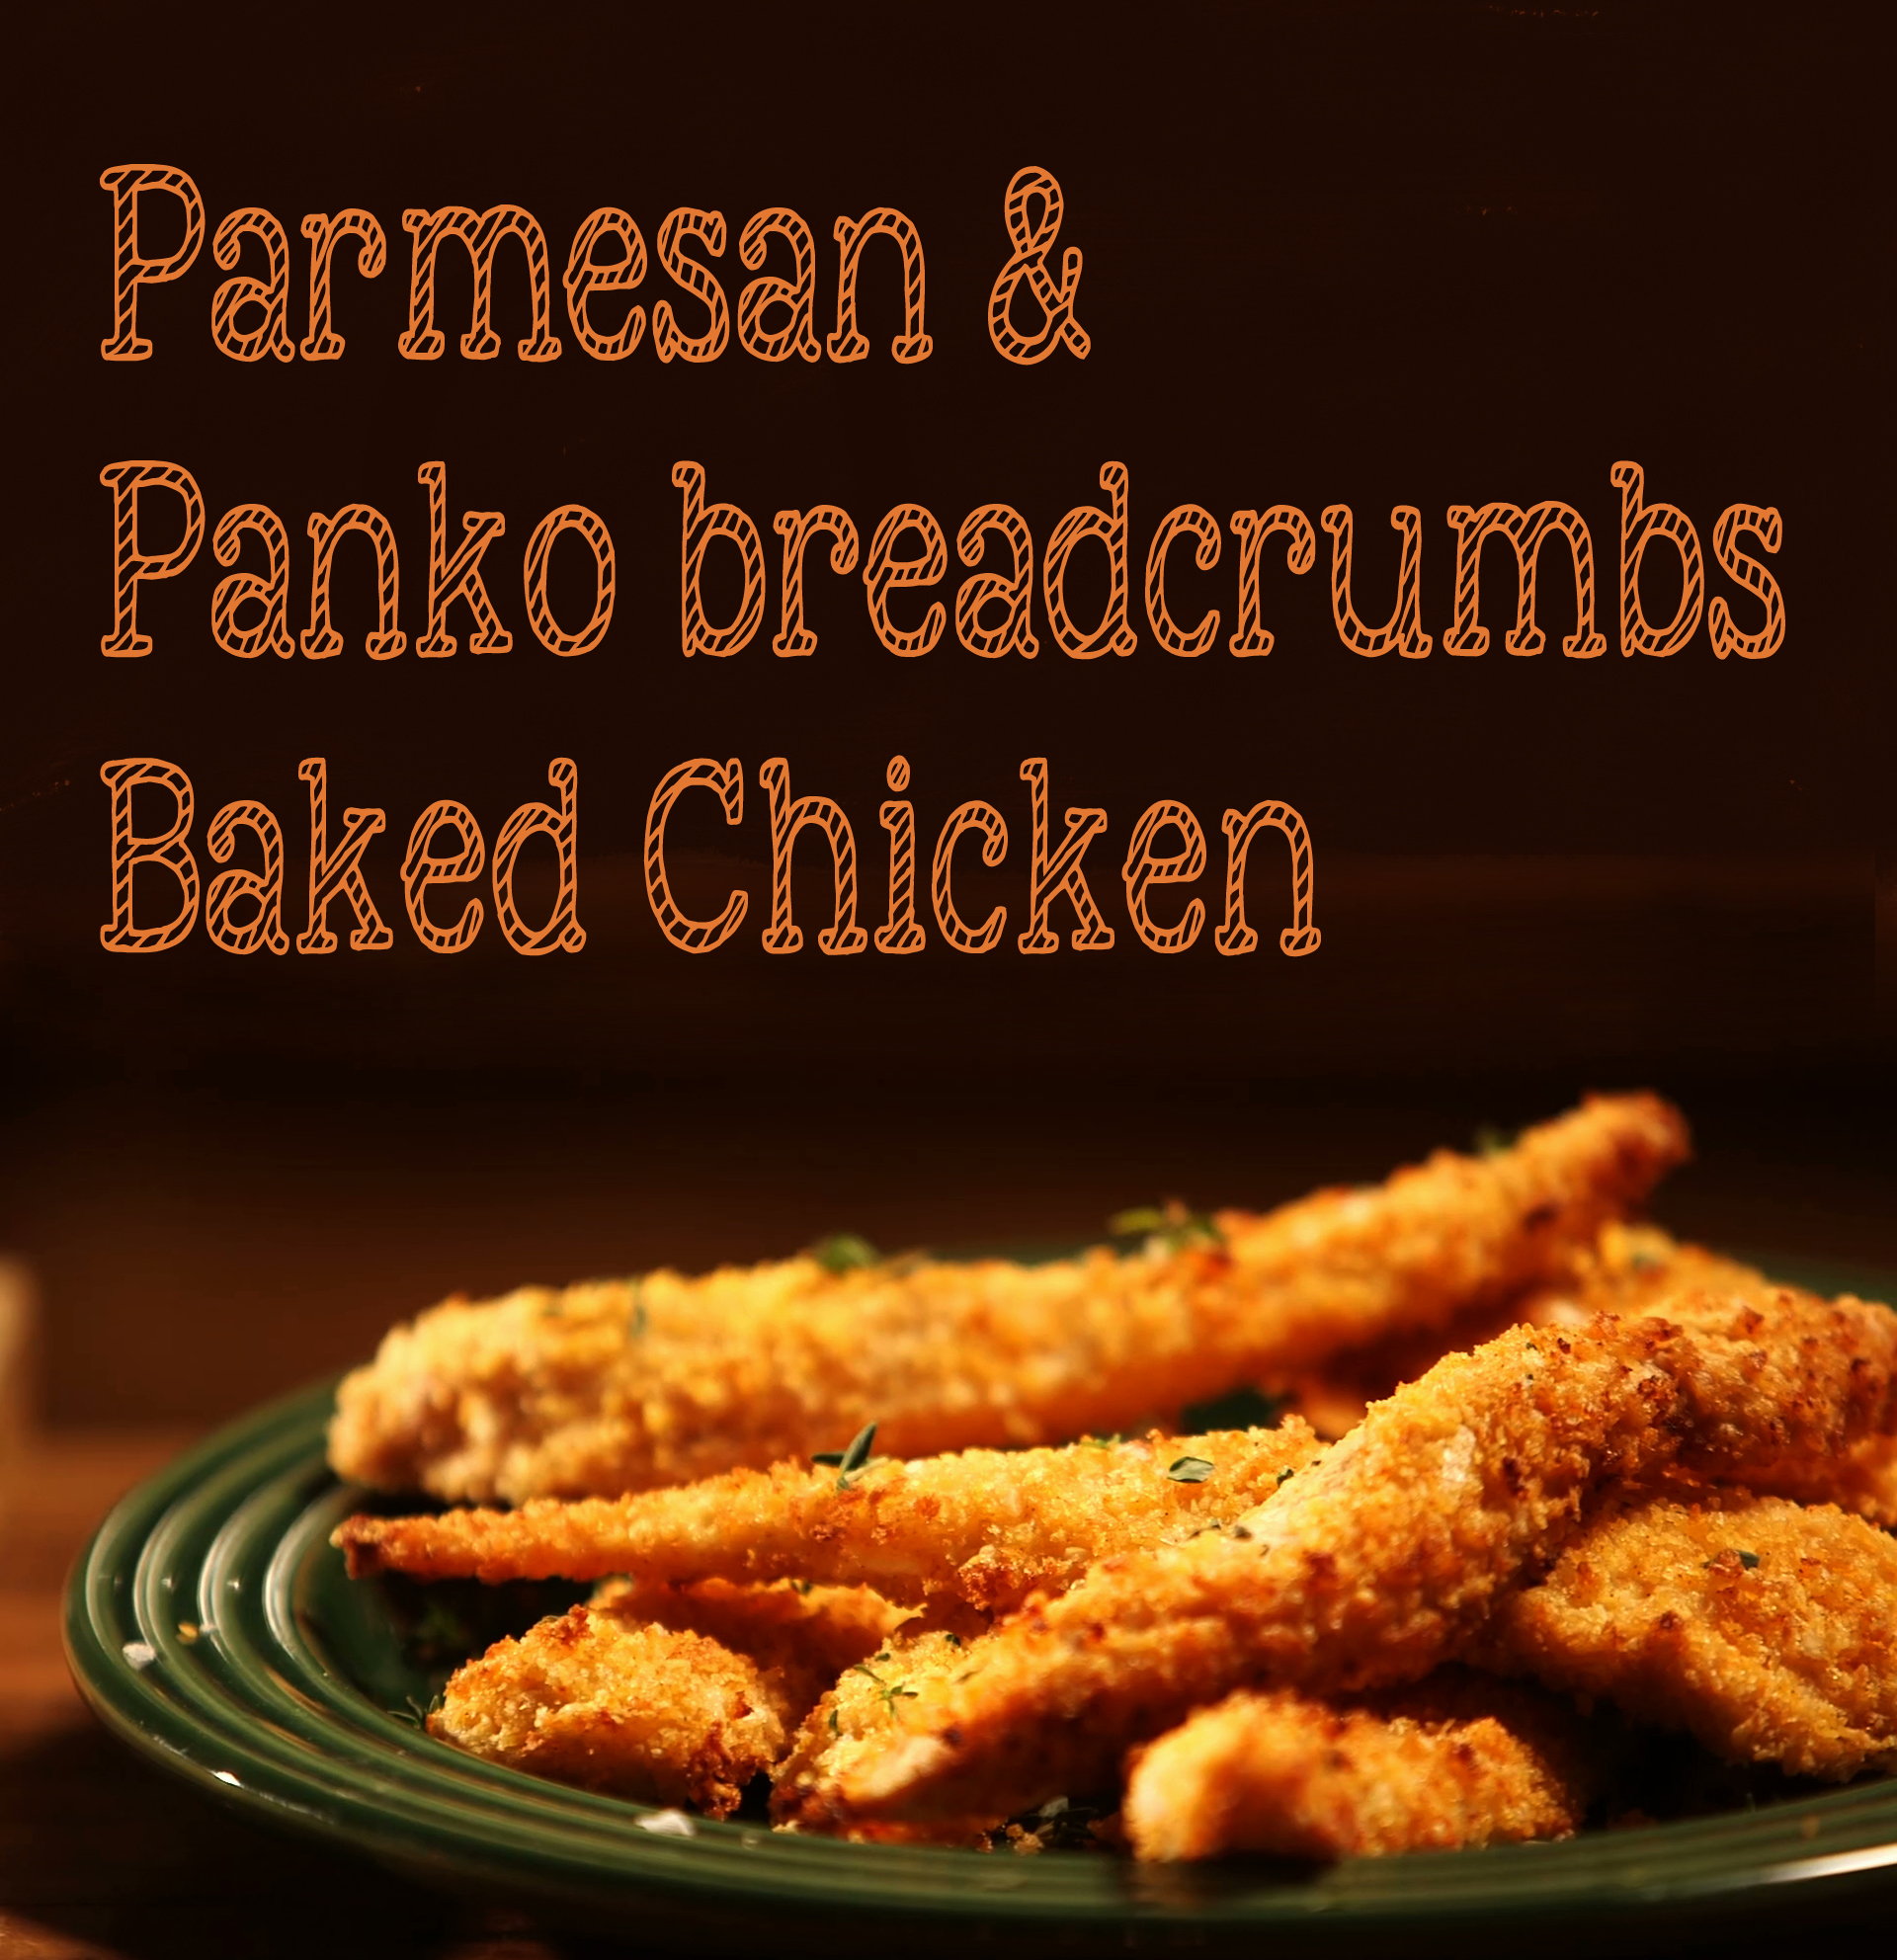 Parmesan and Panko baked chicken strips Buona Pappa